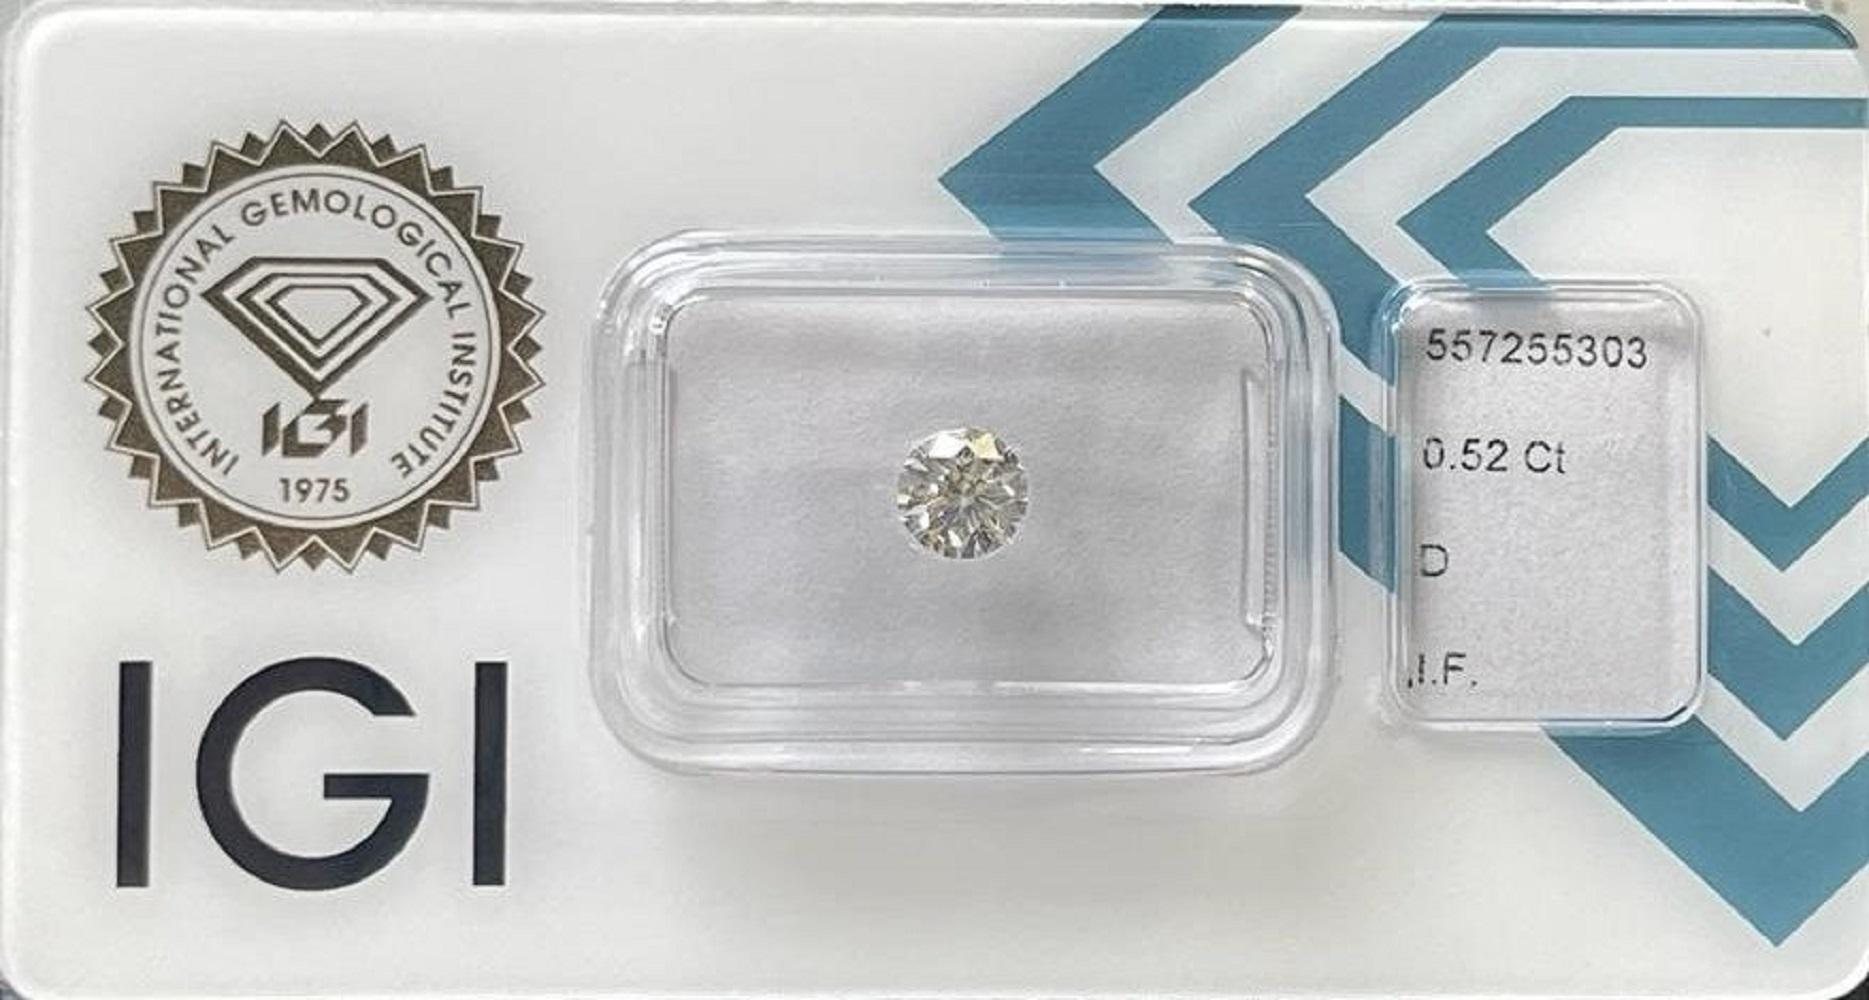 Sparking 1 Pc Flawless Natural Diamond with 0.52 Ct Round D IF IGI Certificate For Sale 2